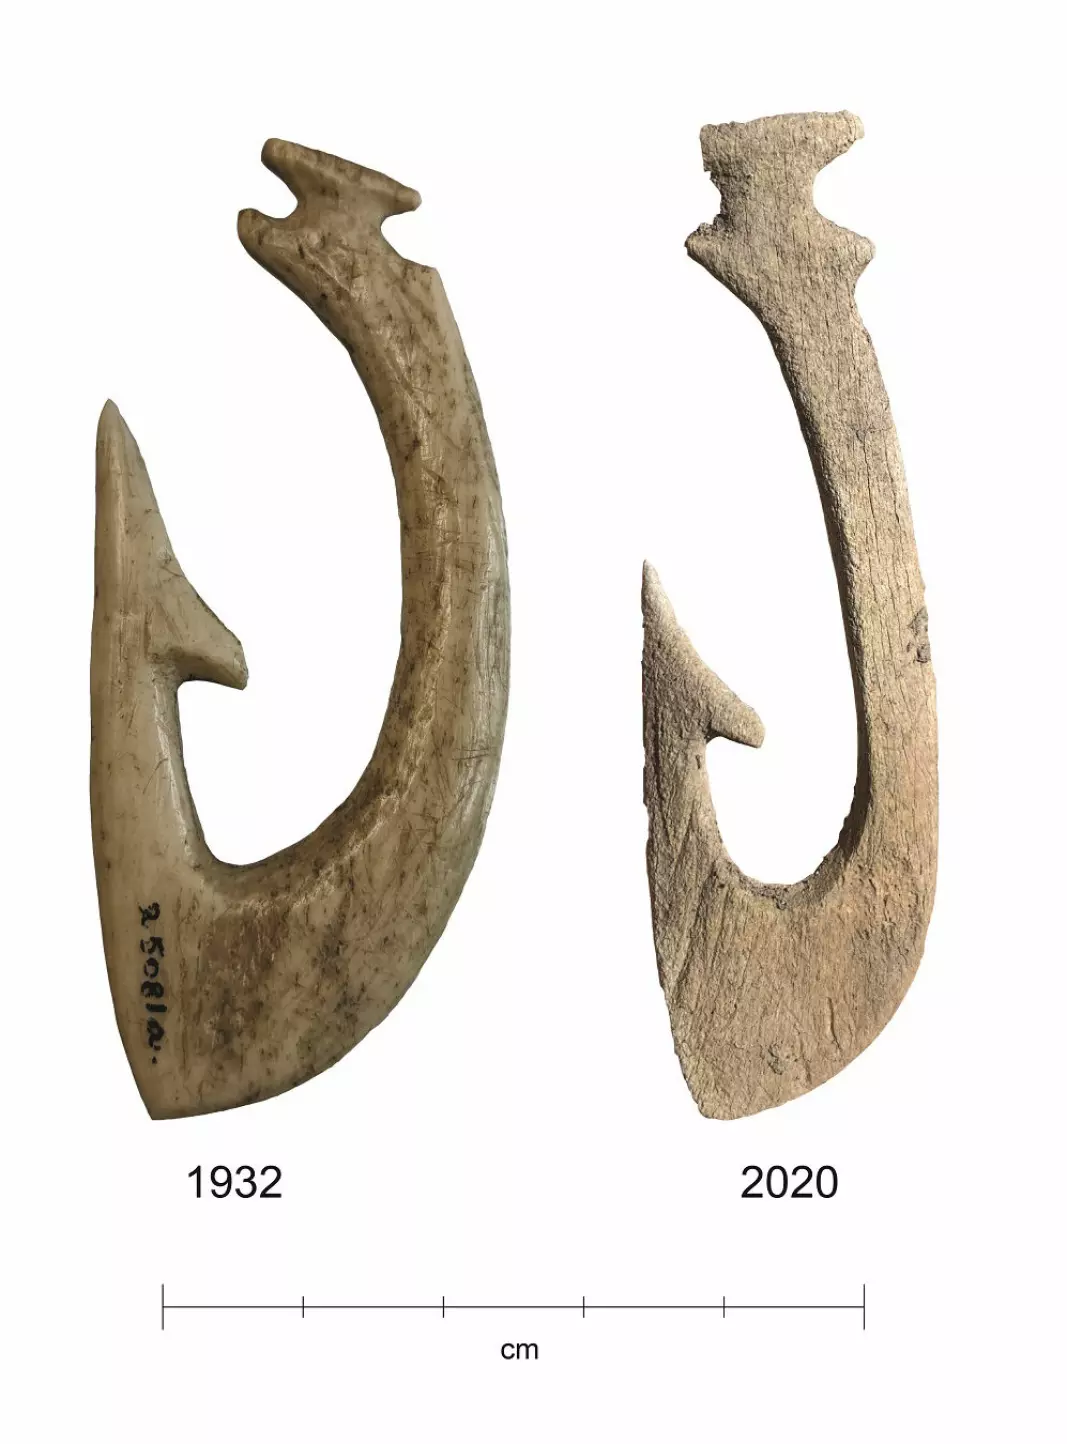 Extremely good conditions in the wetland have preserved the 5000-year-old bone implements very well. But after the wetland was drained, conditions changed. The fish hook found in 2020 is in much worse condition than the hook found in 1932.